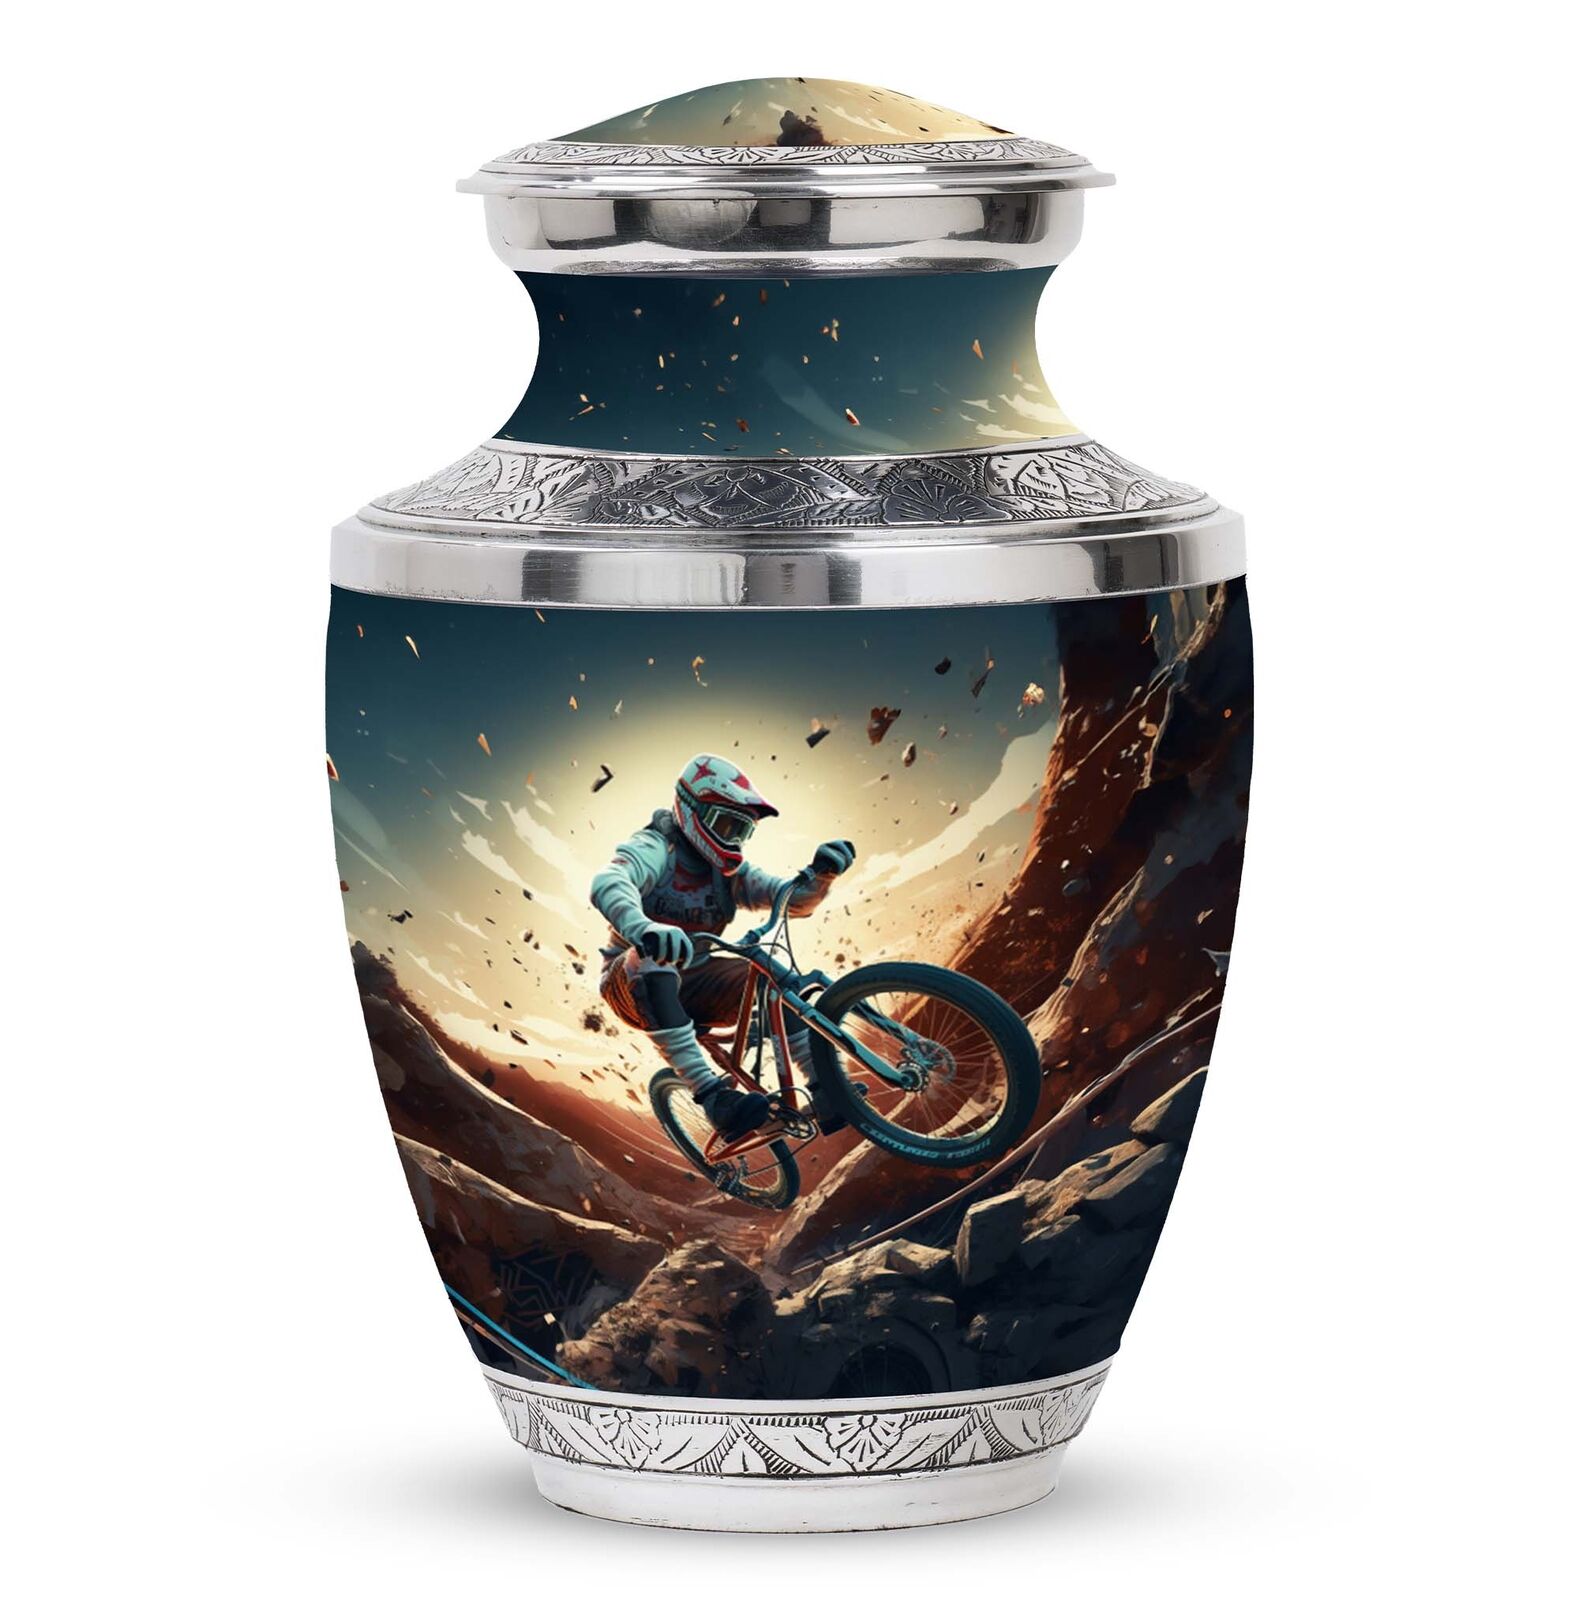 Mountain Trail Biker: Descent Large Cremation Urns For Burial 200 cubic inch